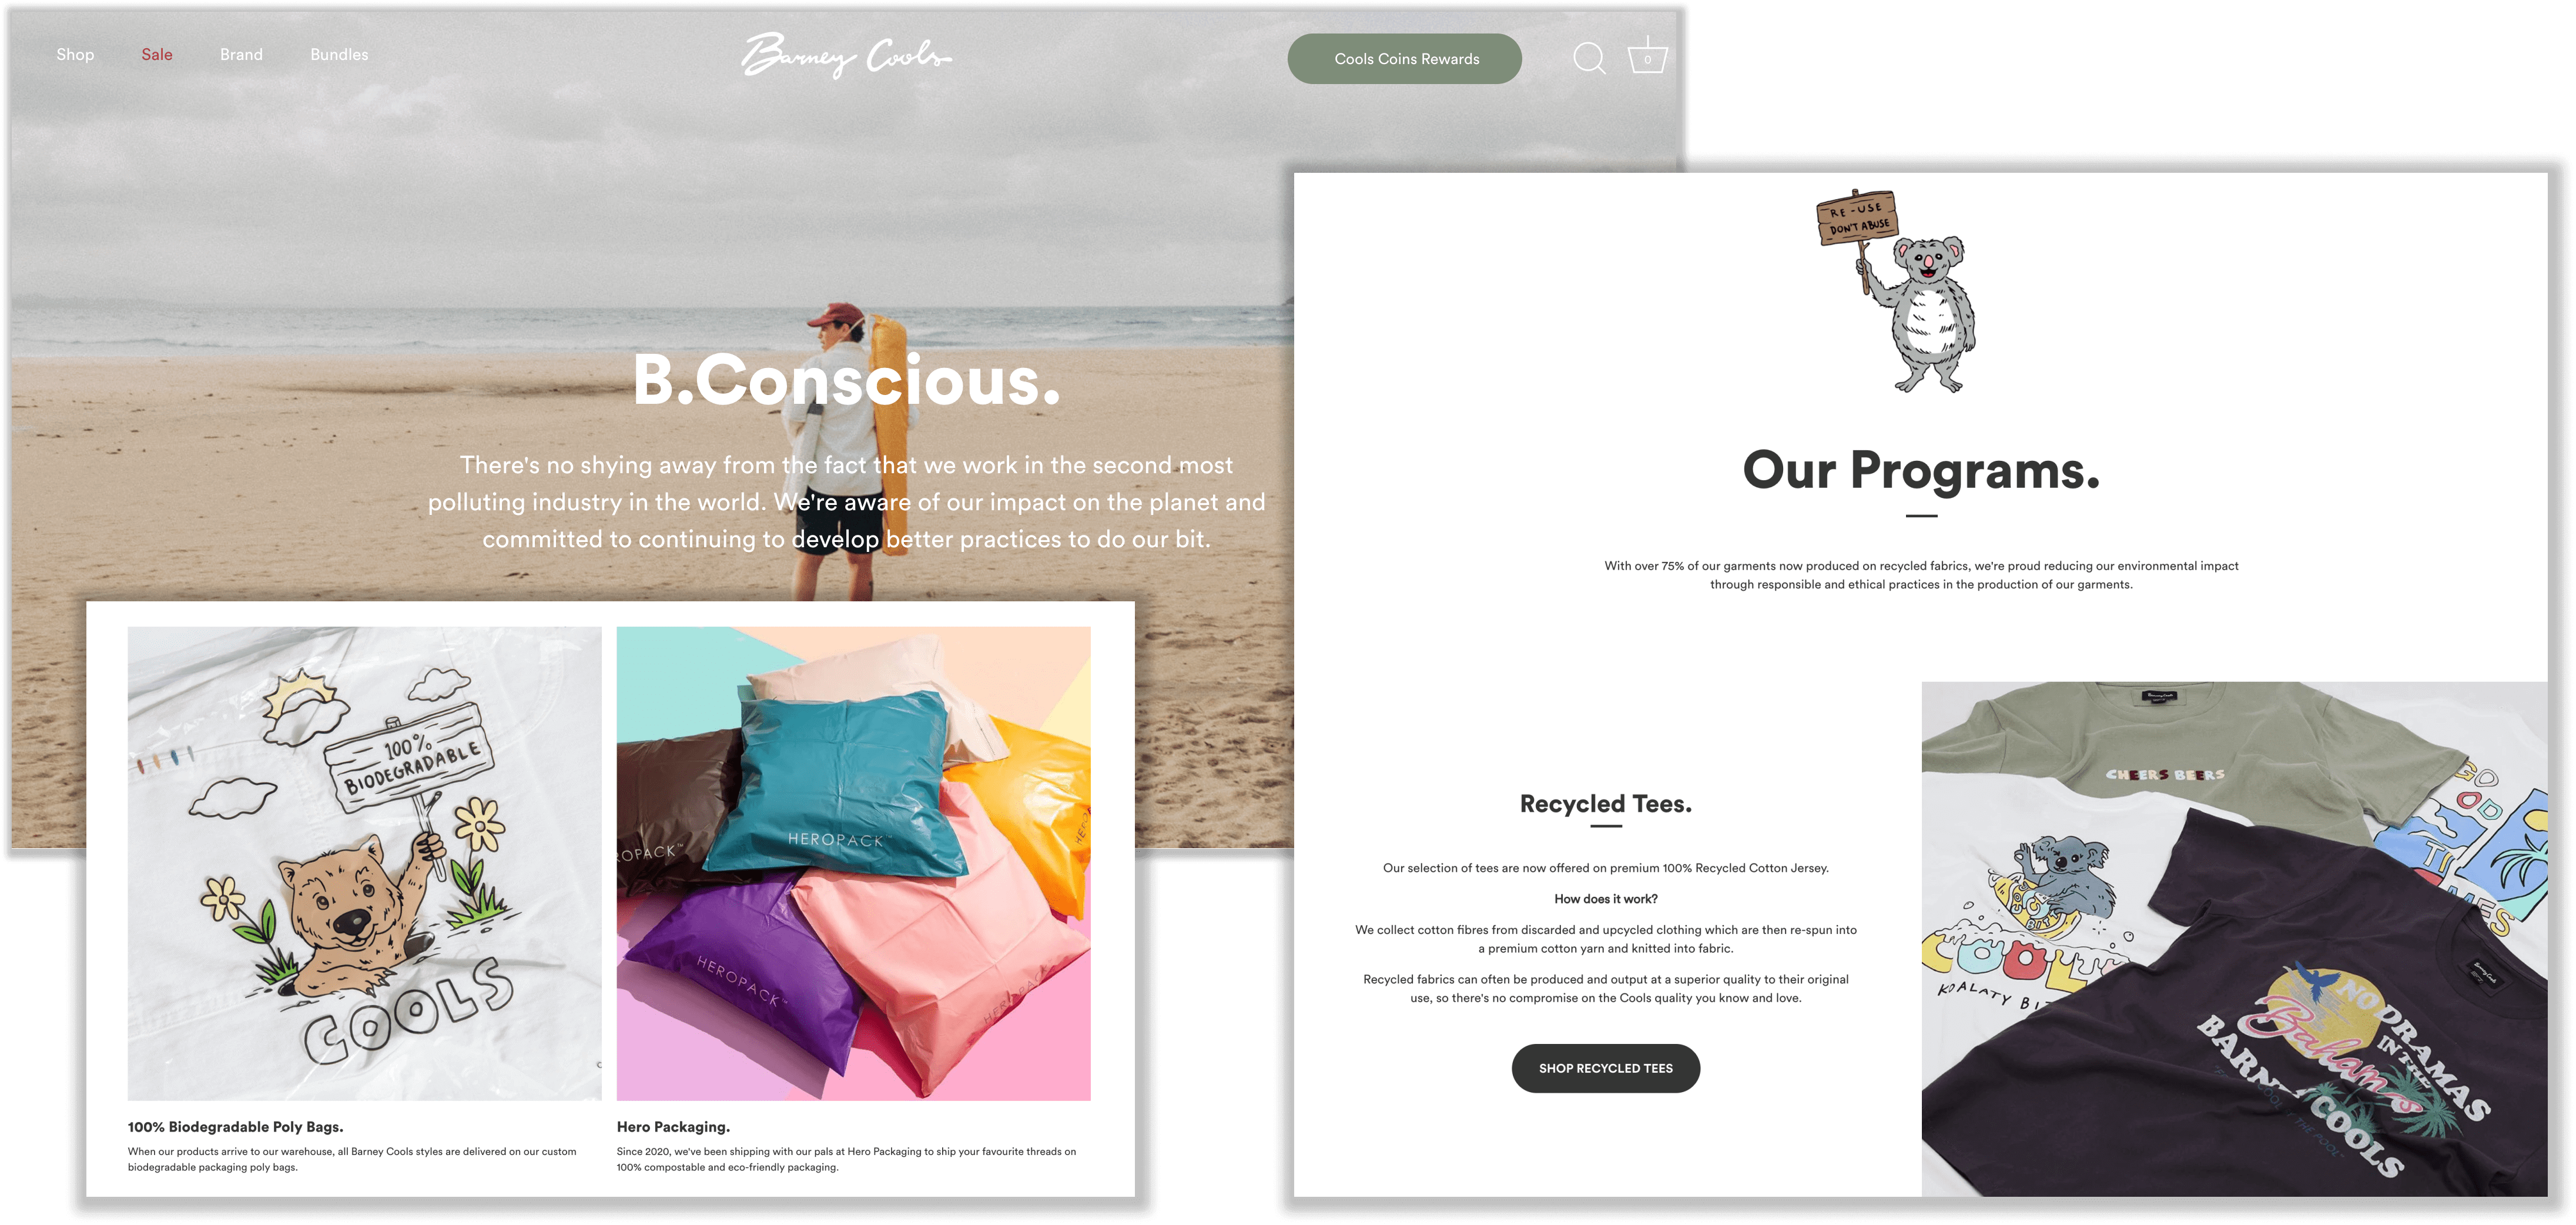 Multiple screenshots from Barney Cool’s website. They show the B. Conscious homepage, the sustainable programs offered like Recycled Tees, and the eco-friendly packaging the brand offers. 